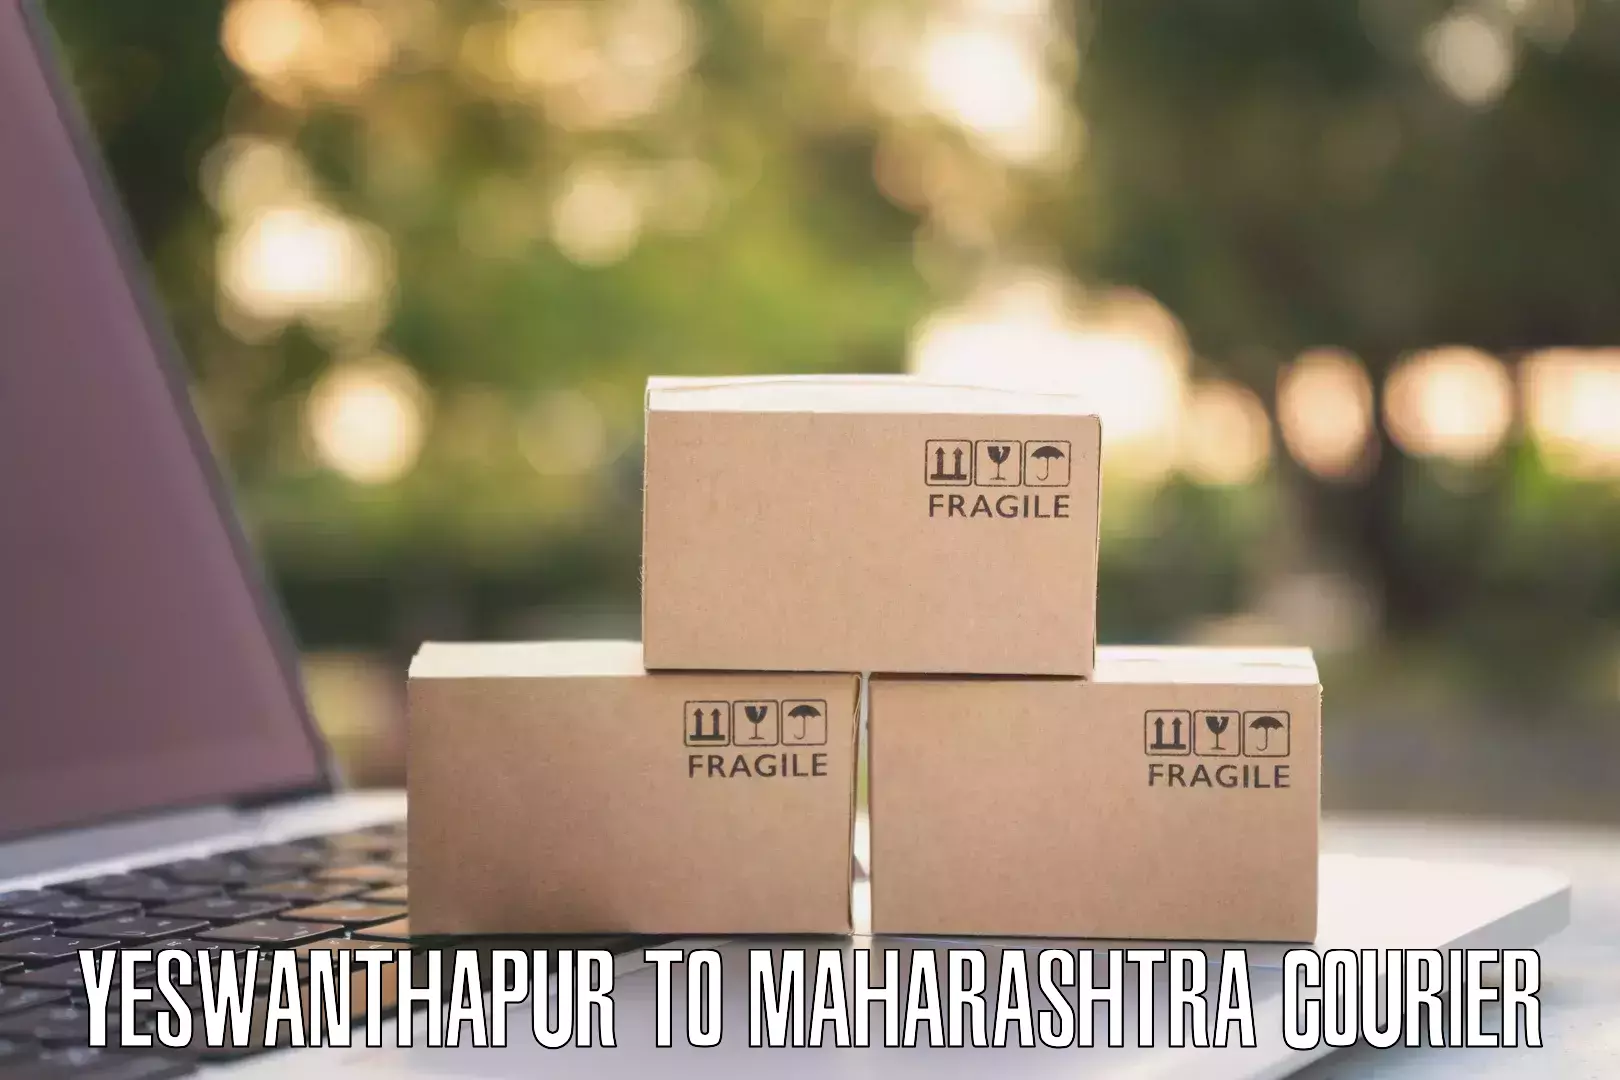 Professional courier handling Yeswanthapur to Alibag